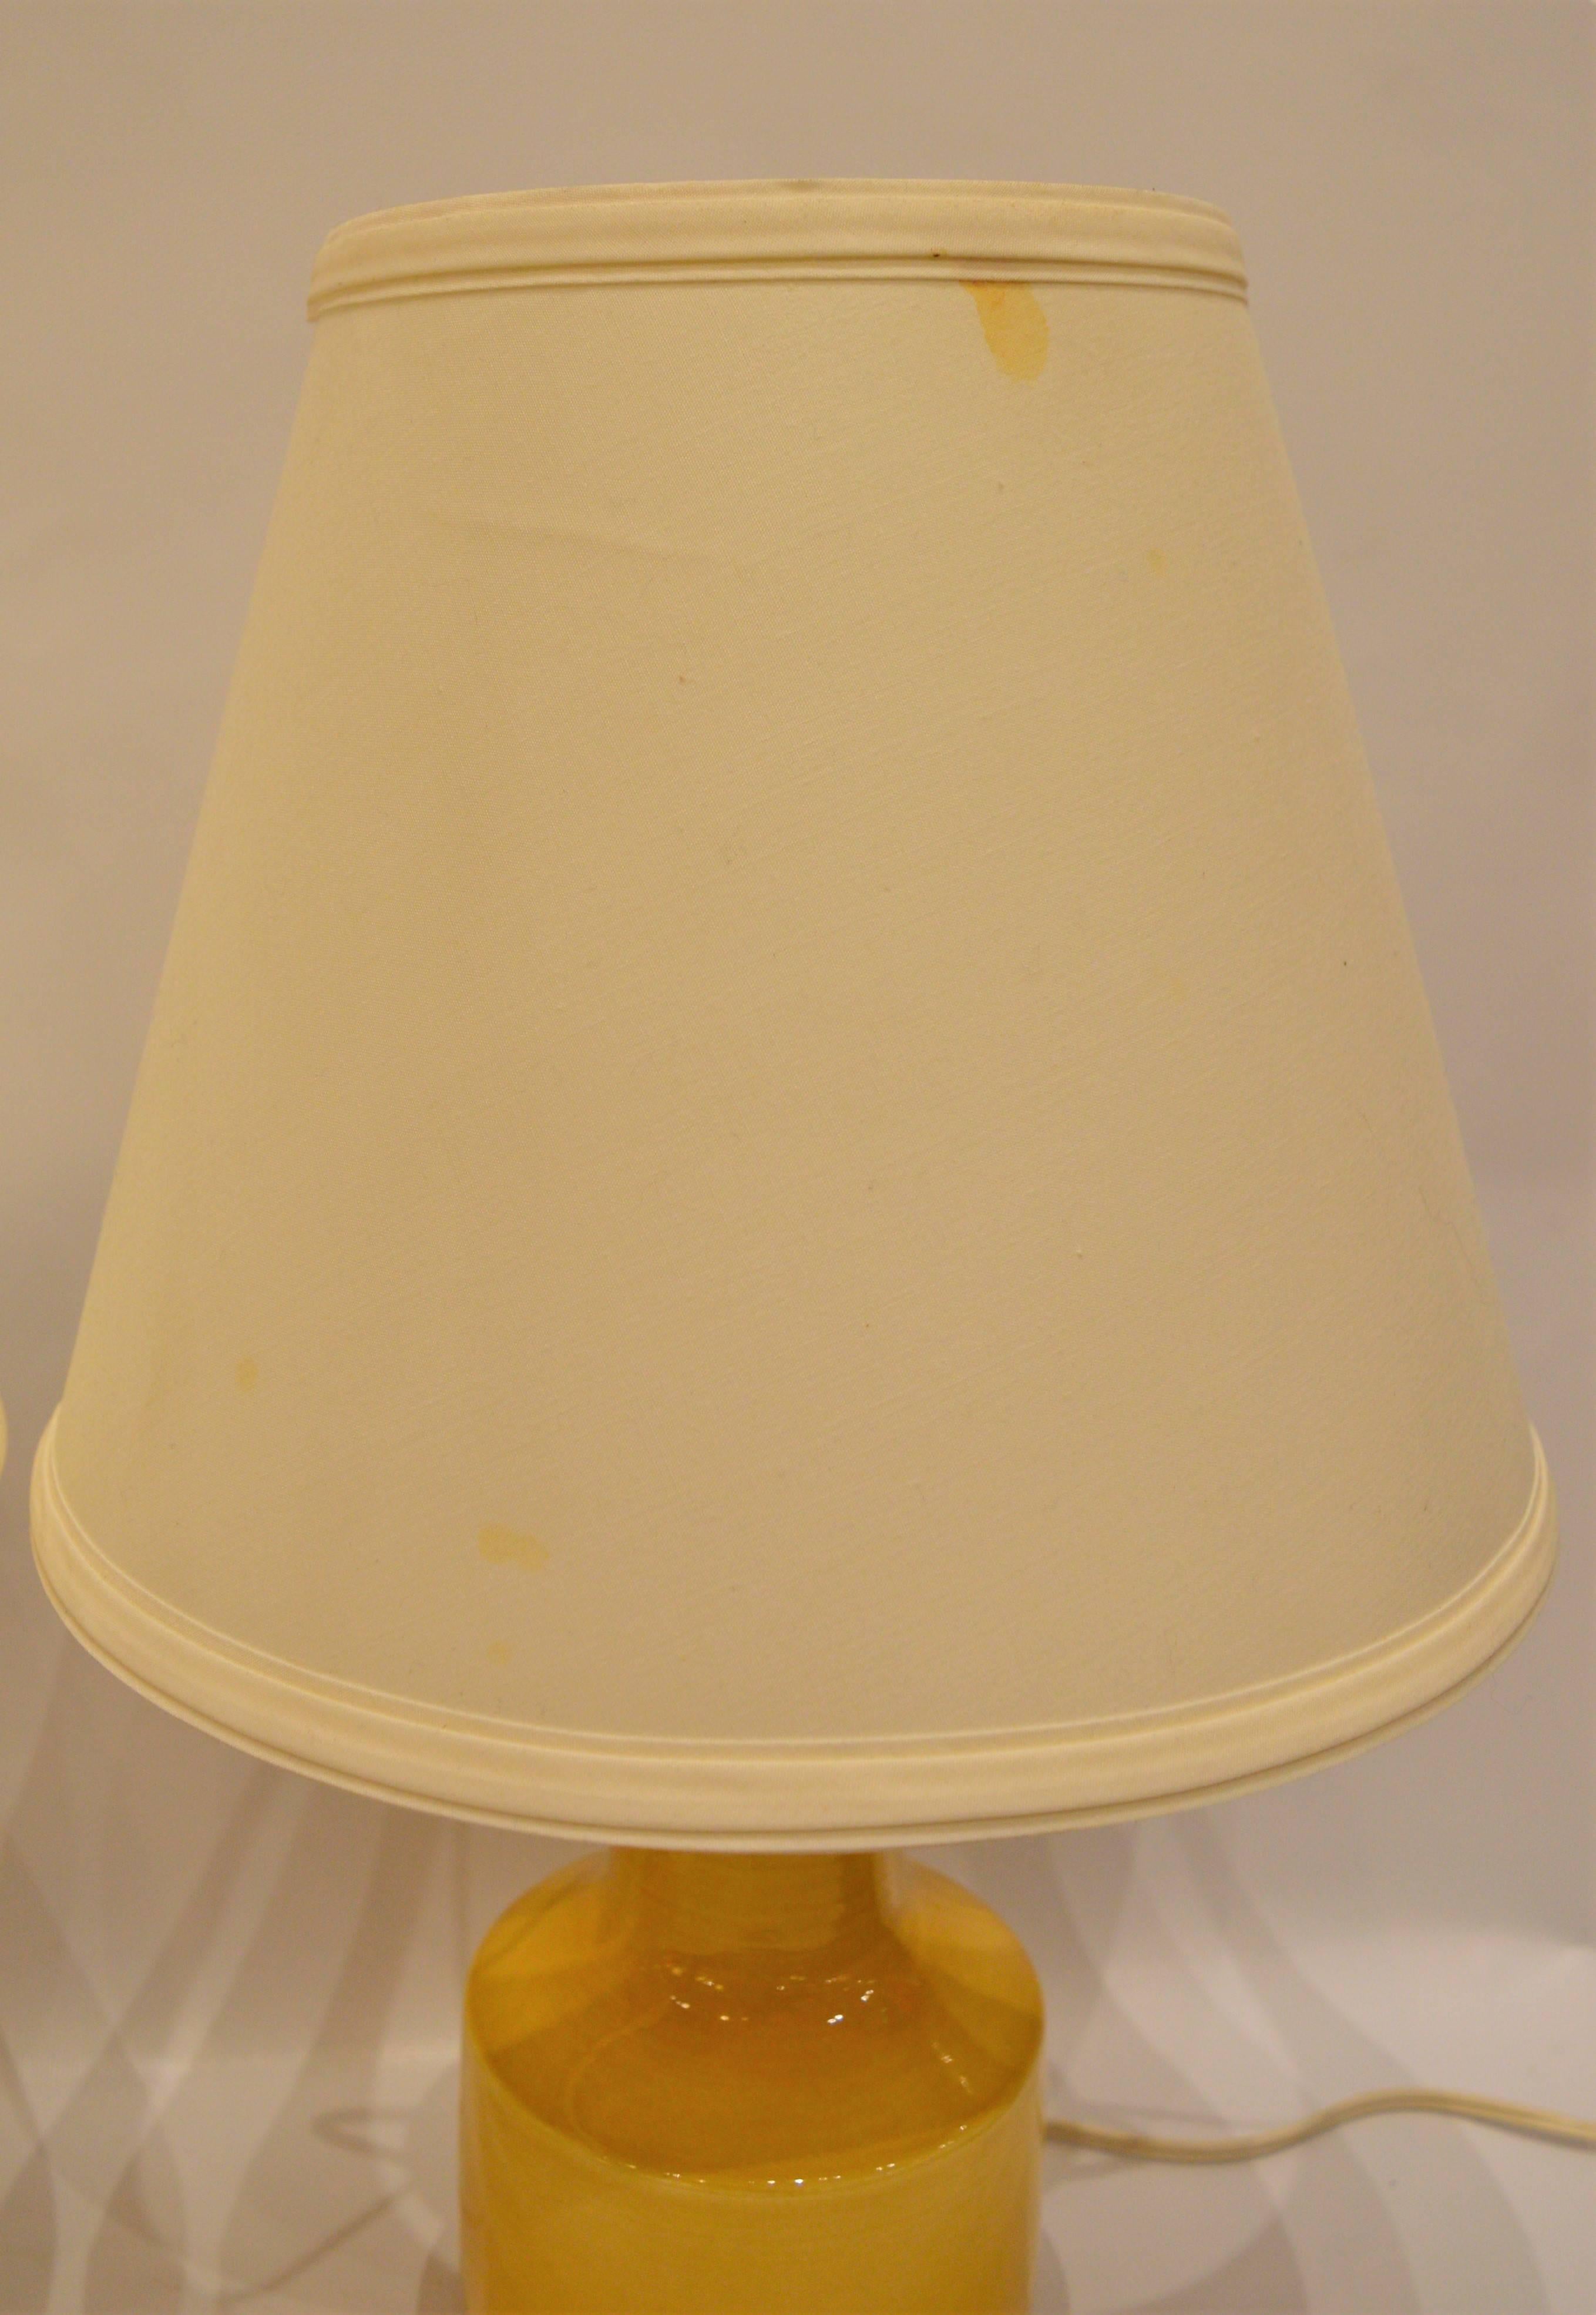 Fabric Pair of Small Soft Yellow Lotte and Gunnar Bostlund Ceramic Bedside Lamps